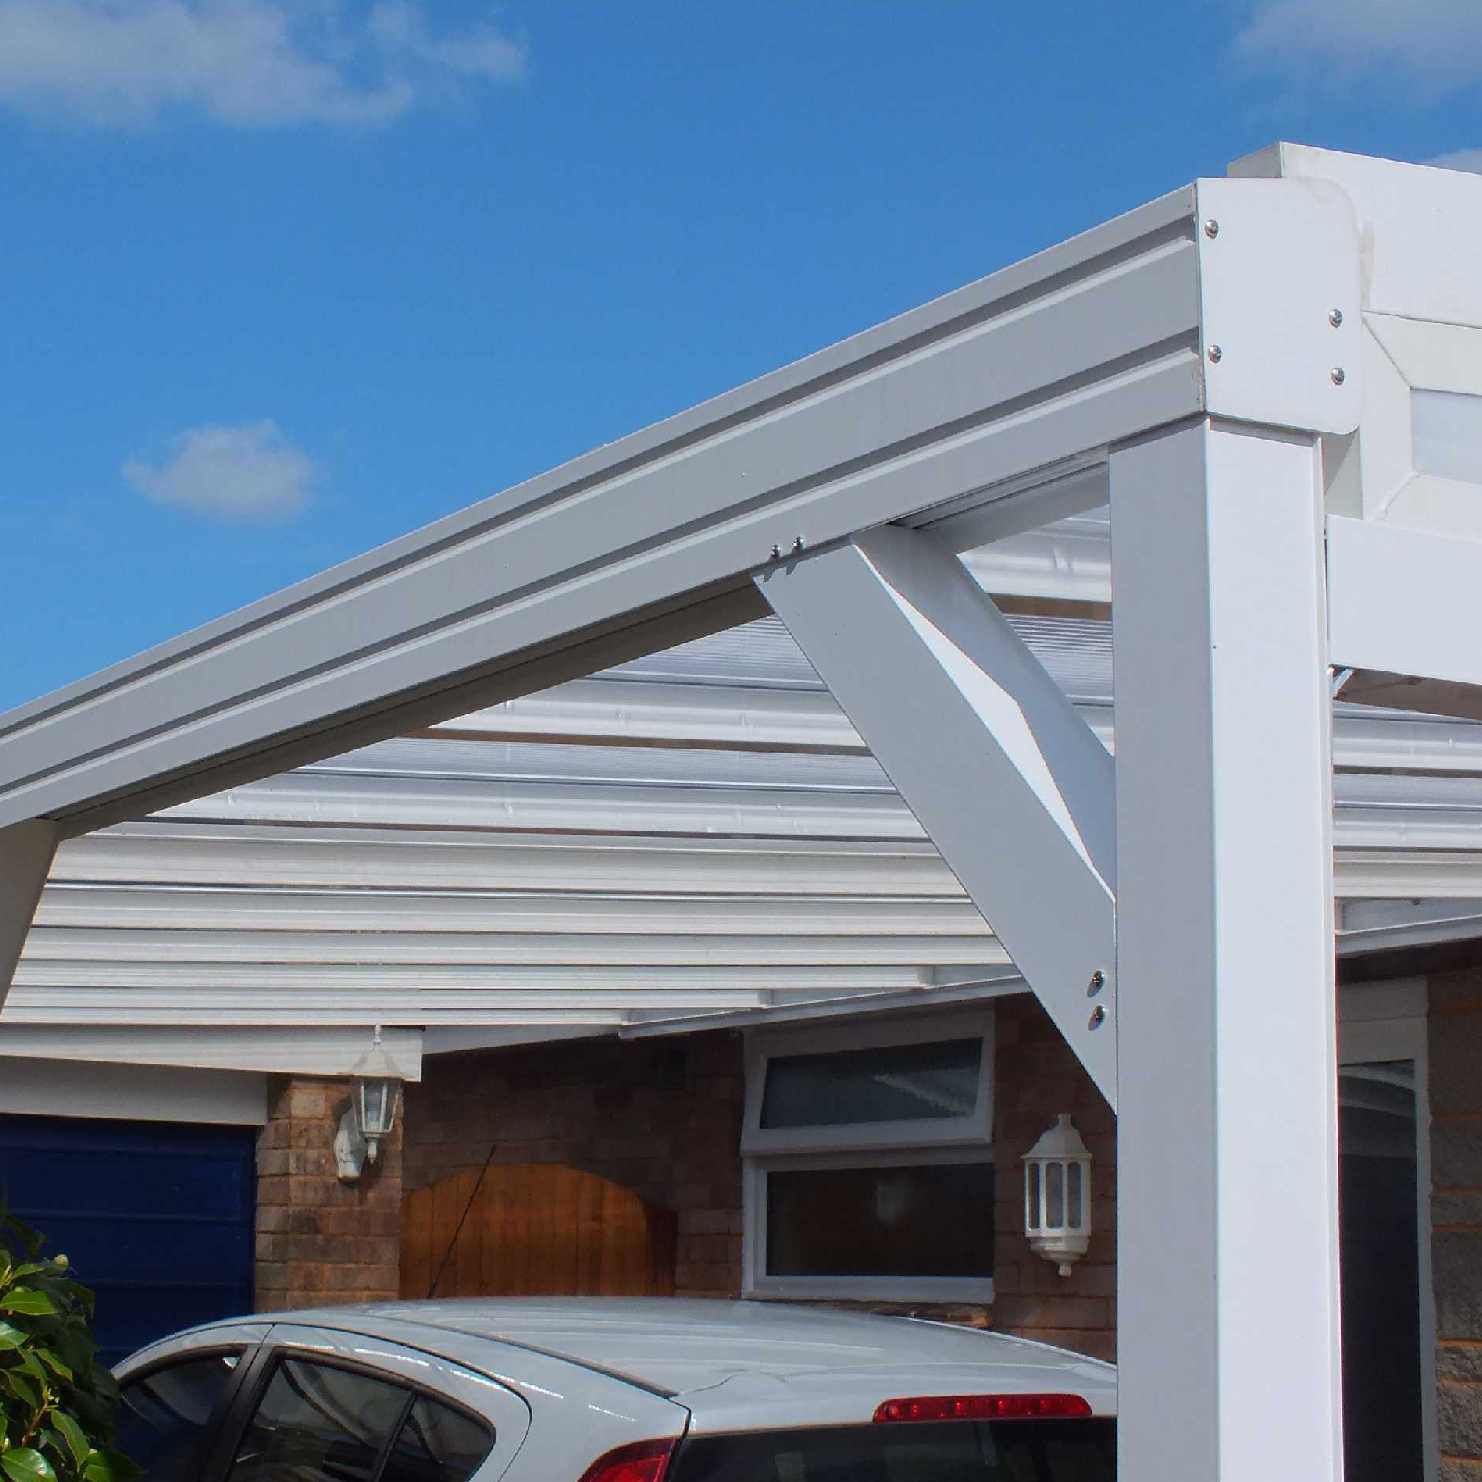 Buy Omega Smart Lean-To Canopy, White with 16mm Polycarbonate Glazing - 8.4m (W) x 4.5m (P), (4) Supporting Posts online today